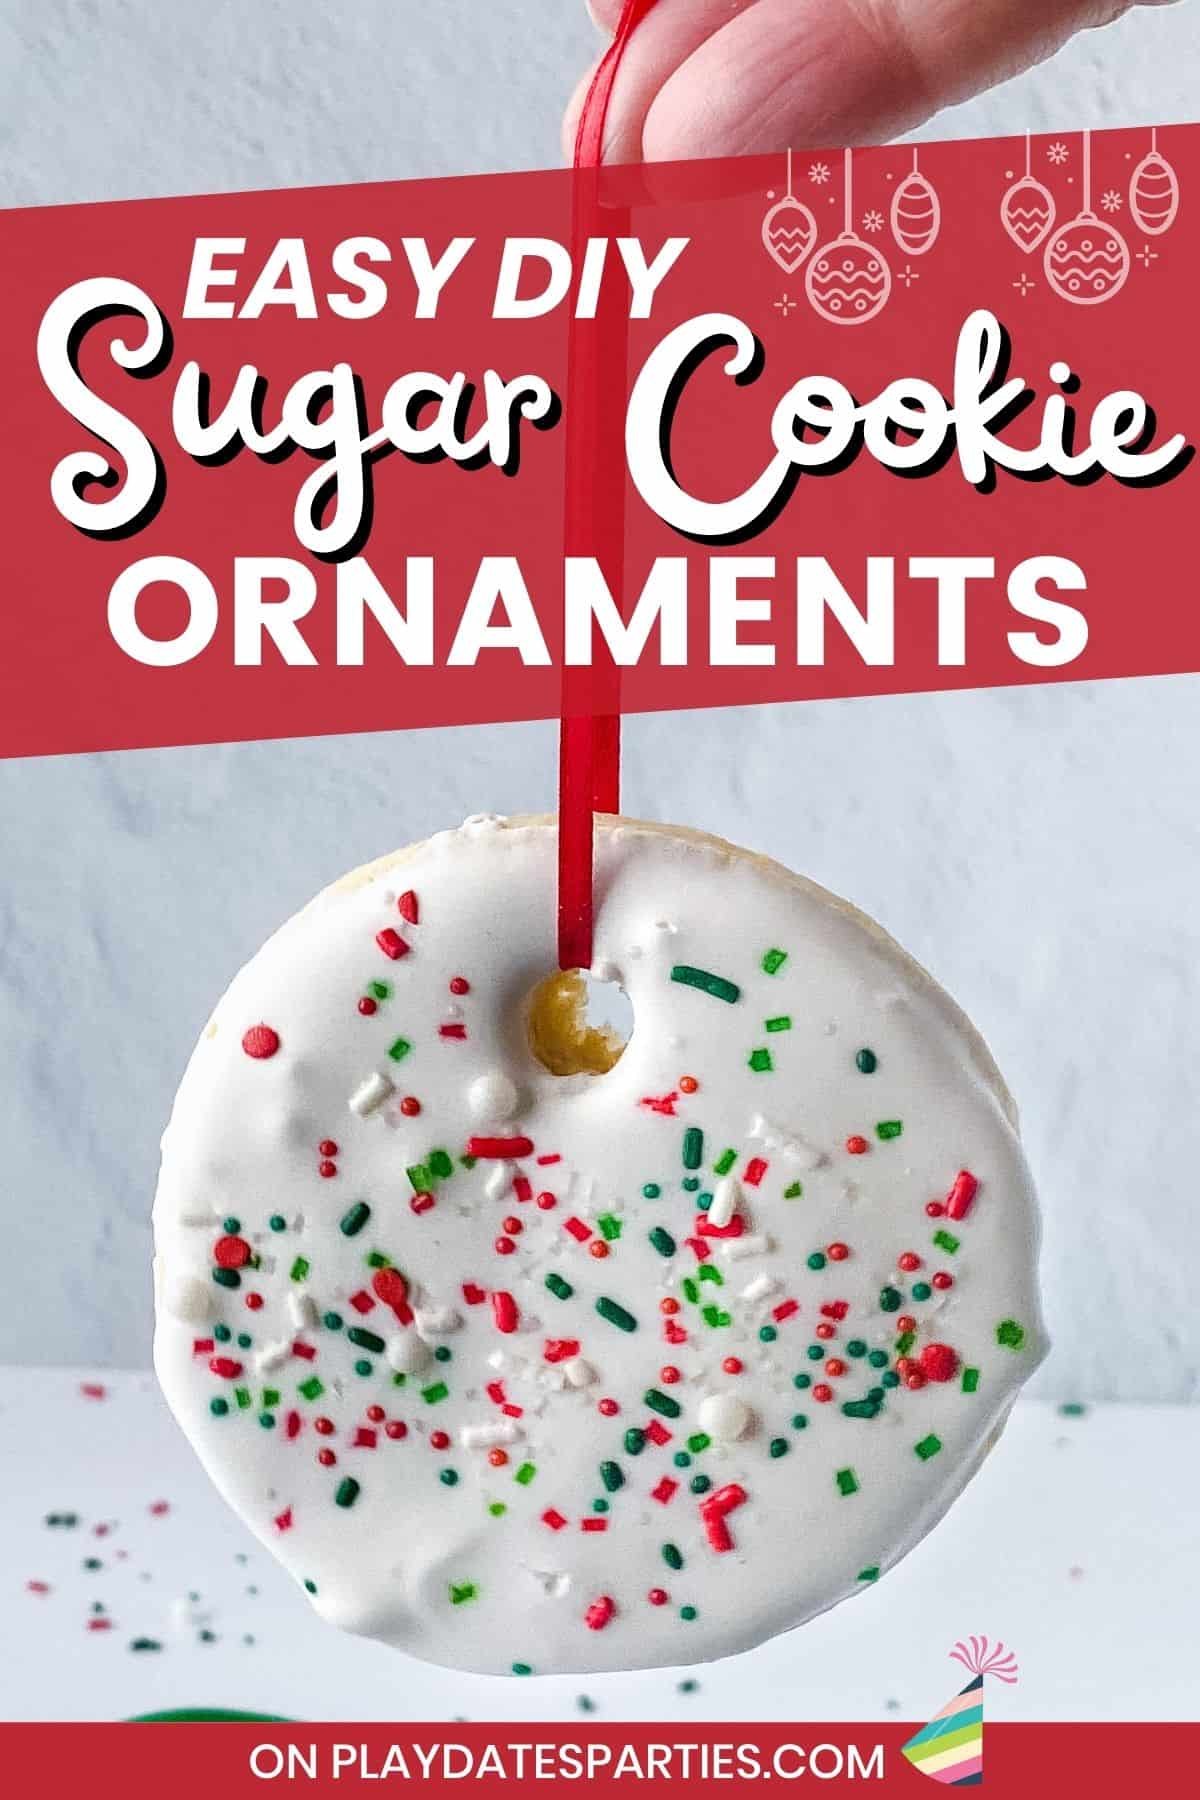 An ornament cookie hanging from a ribbon with text overlay how to make sugar cookie ornaments.